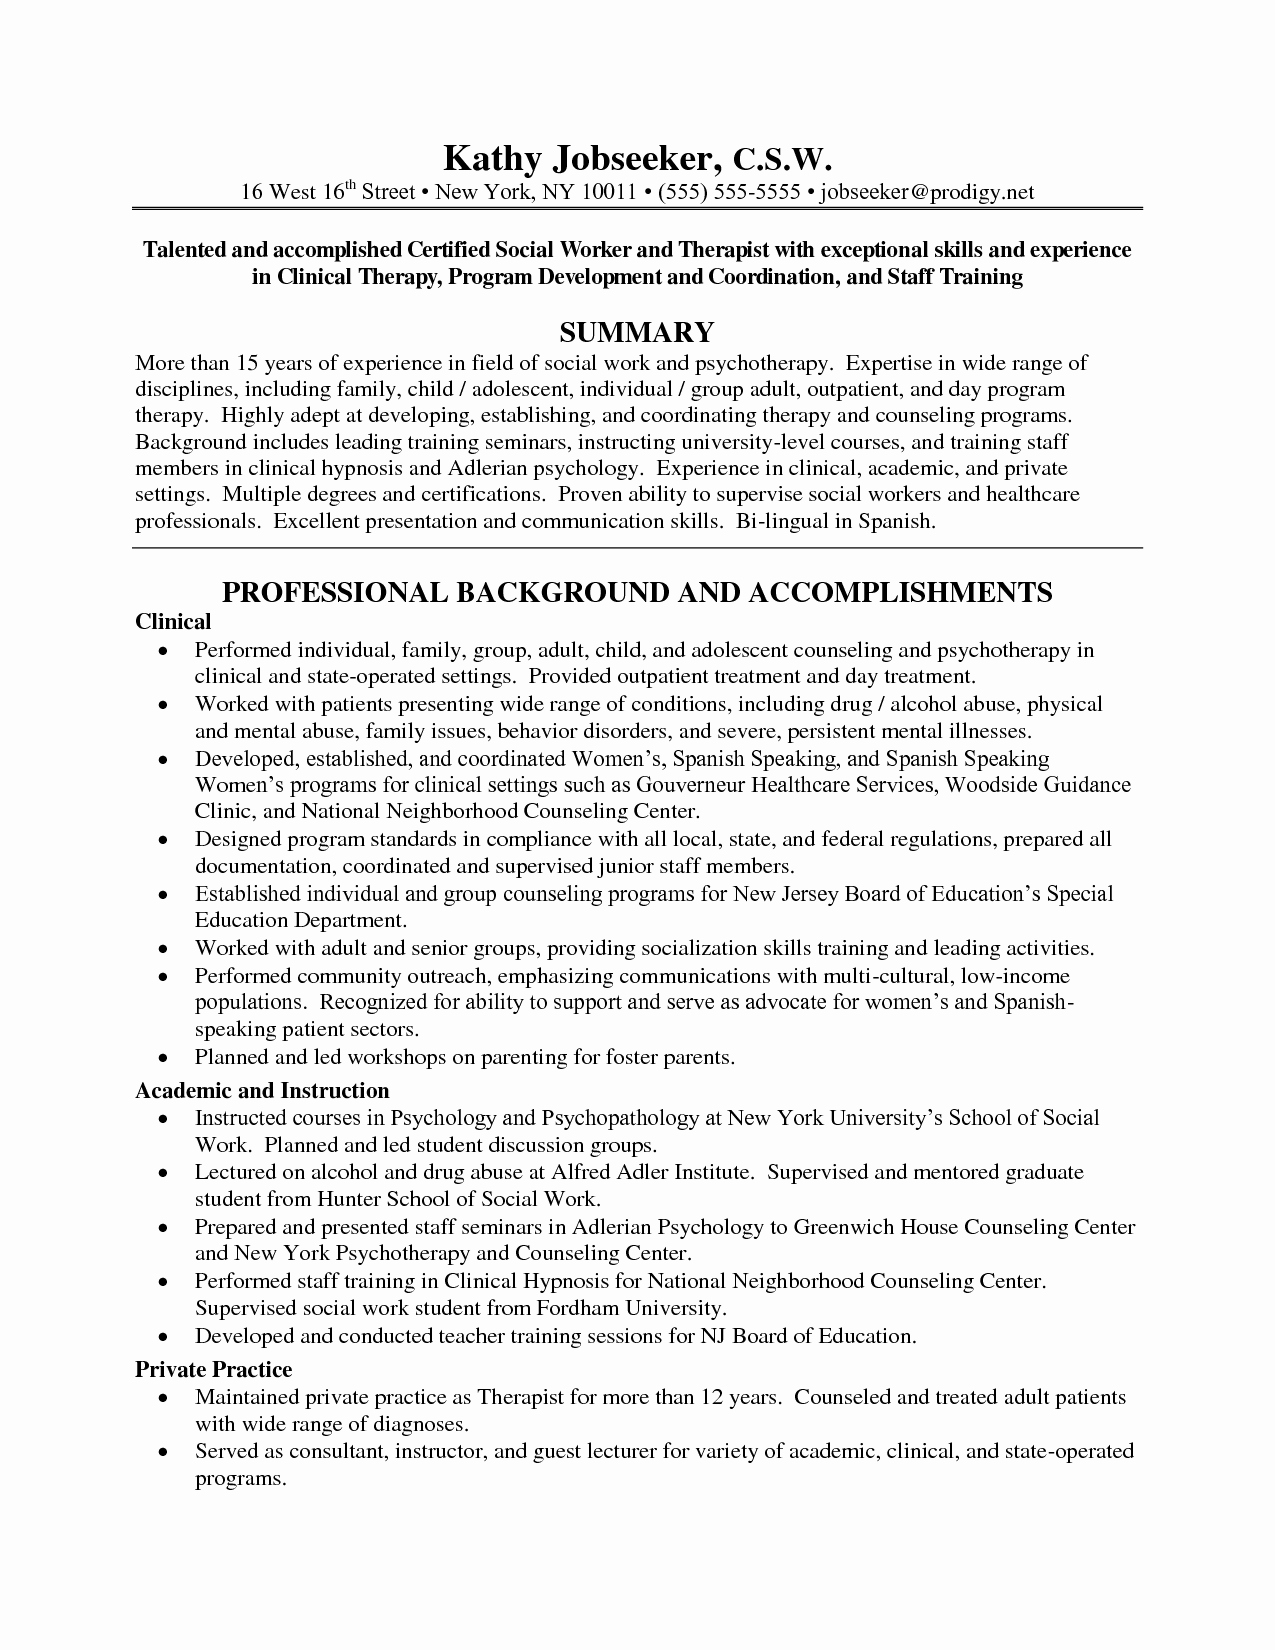 Social Work Resume Examples social Work Resume with